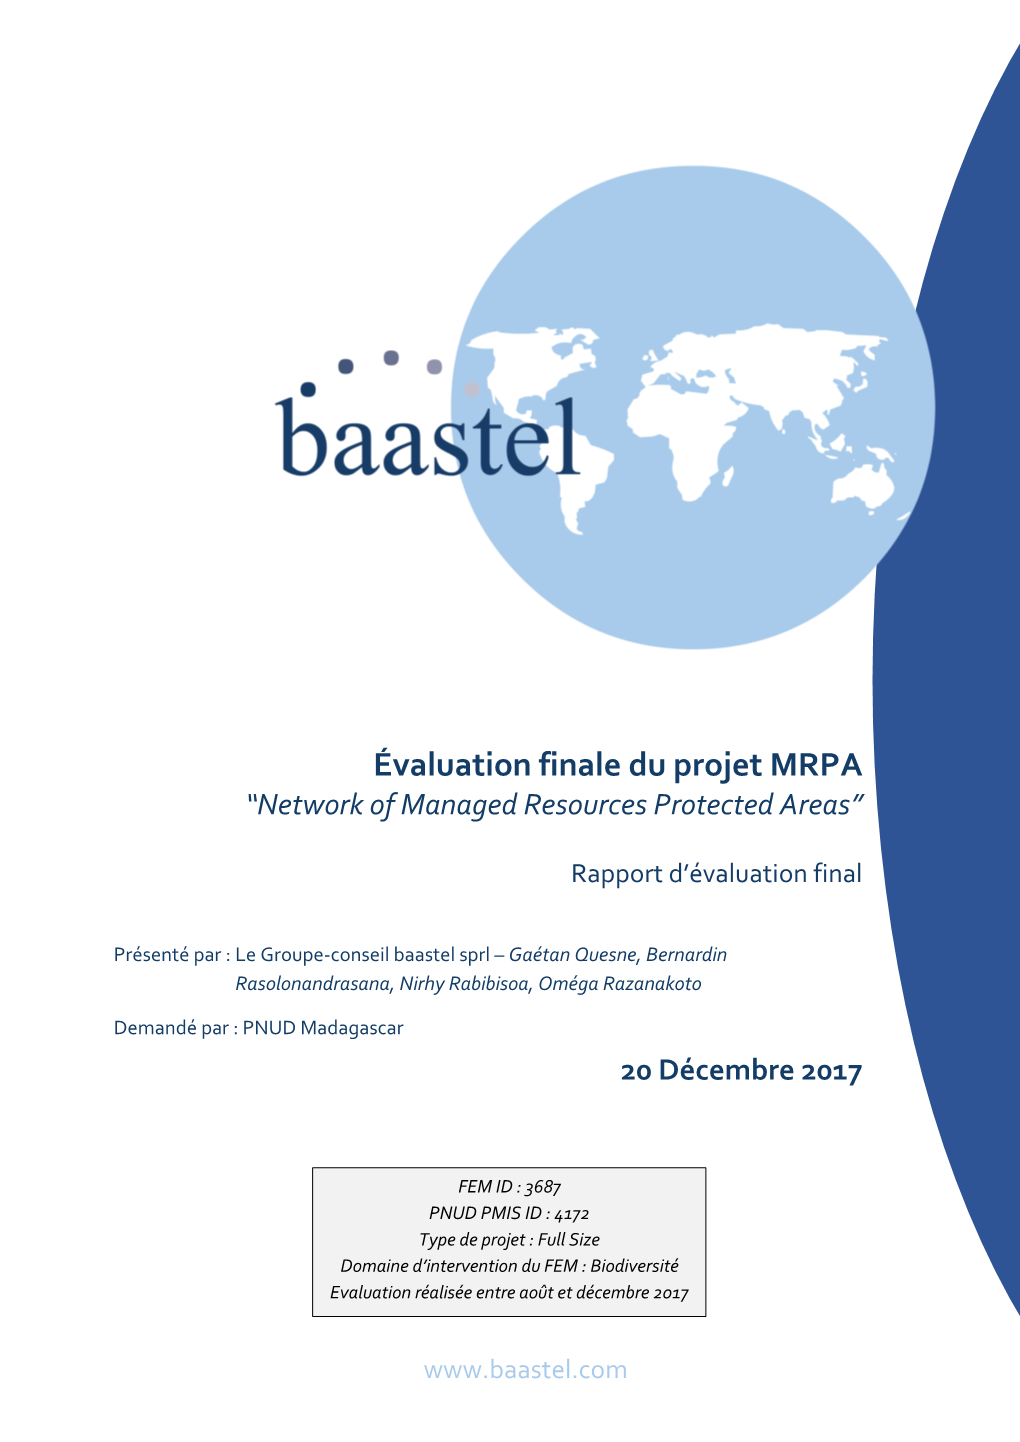 Évaluation Finale Du Projet MRPA “Network of Managed Resources Protected Areas”